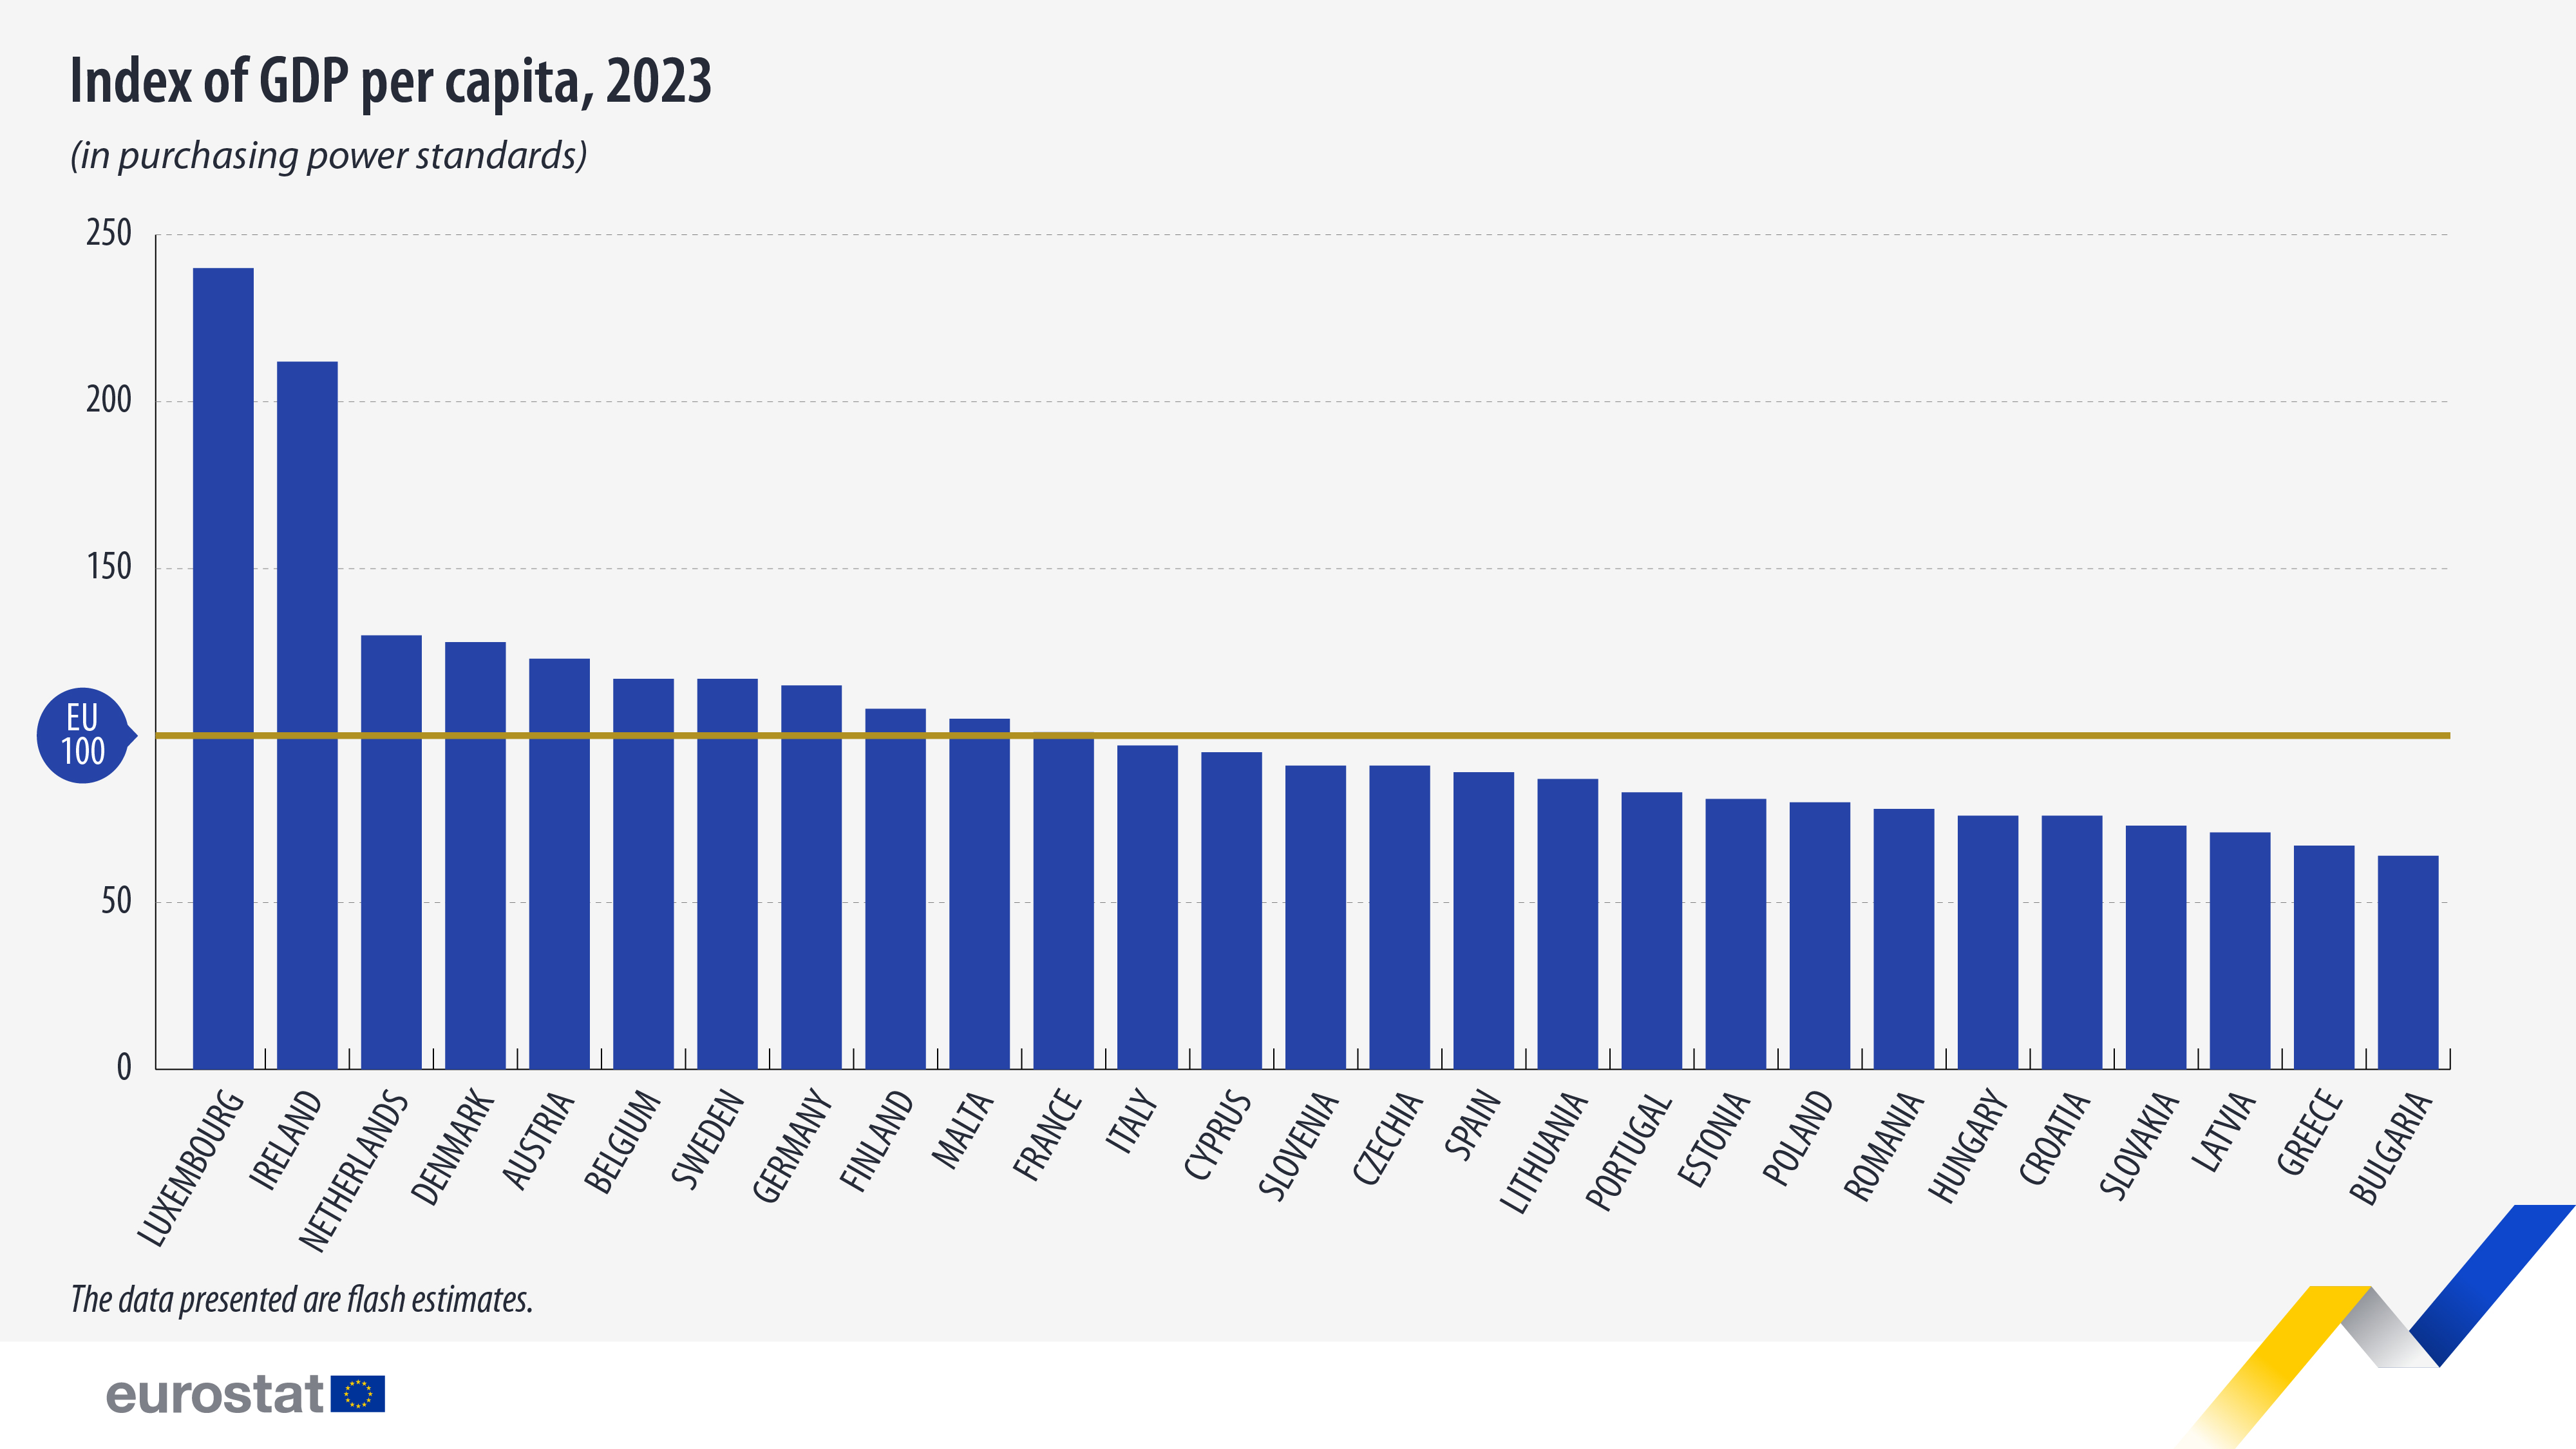 Index of GDP per capita, 2023 in purchasing power standards. Chart. See link to full database below.